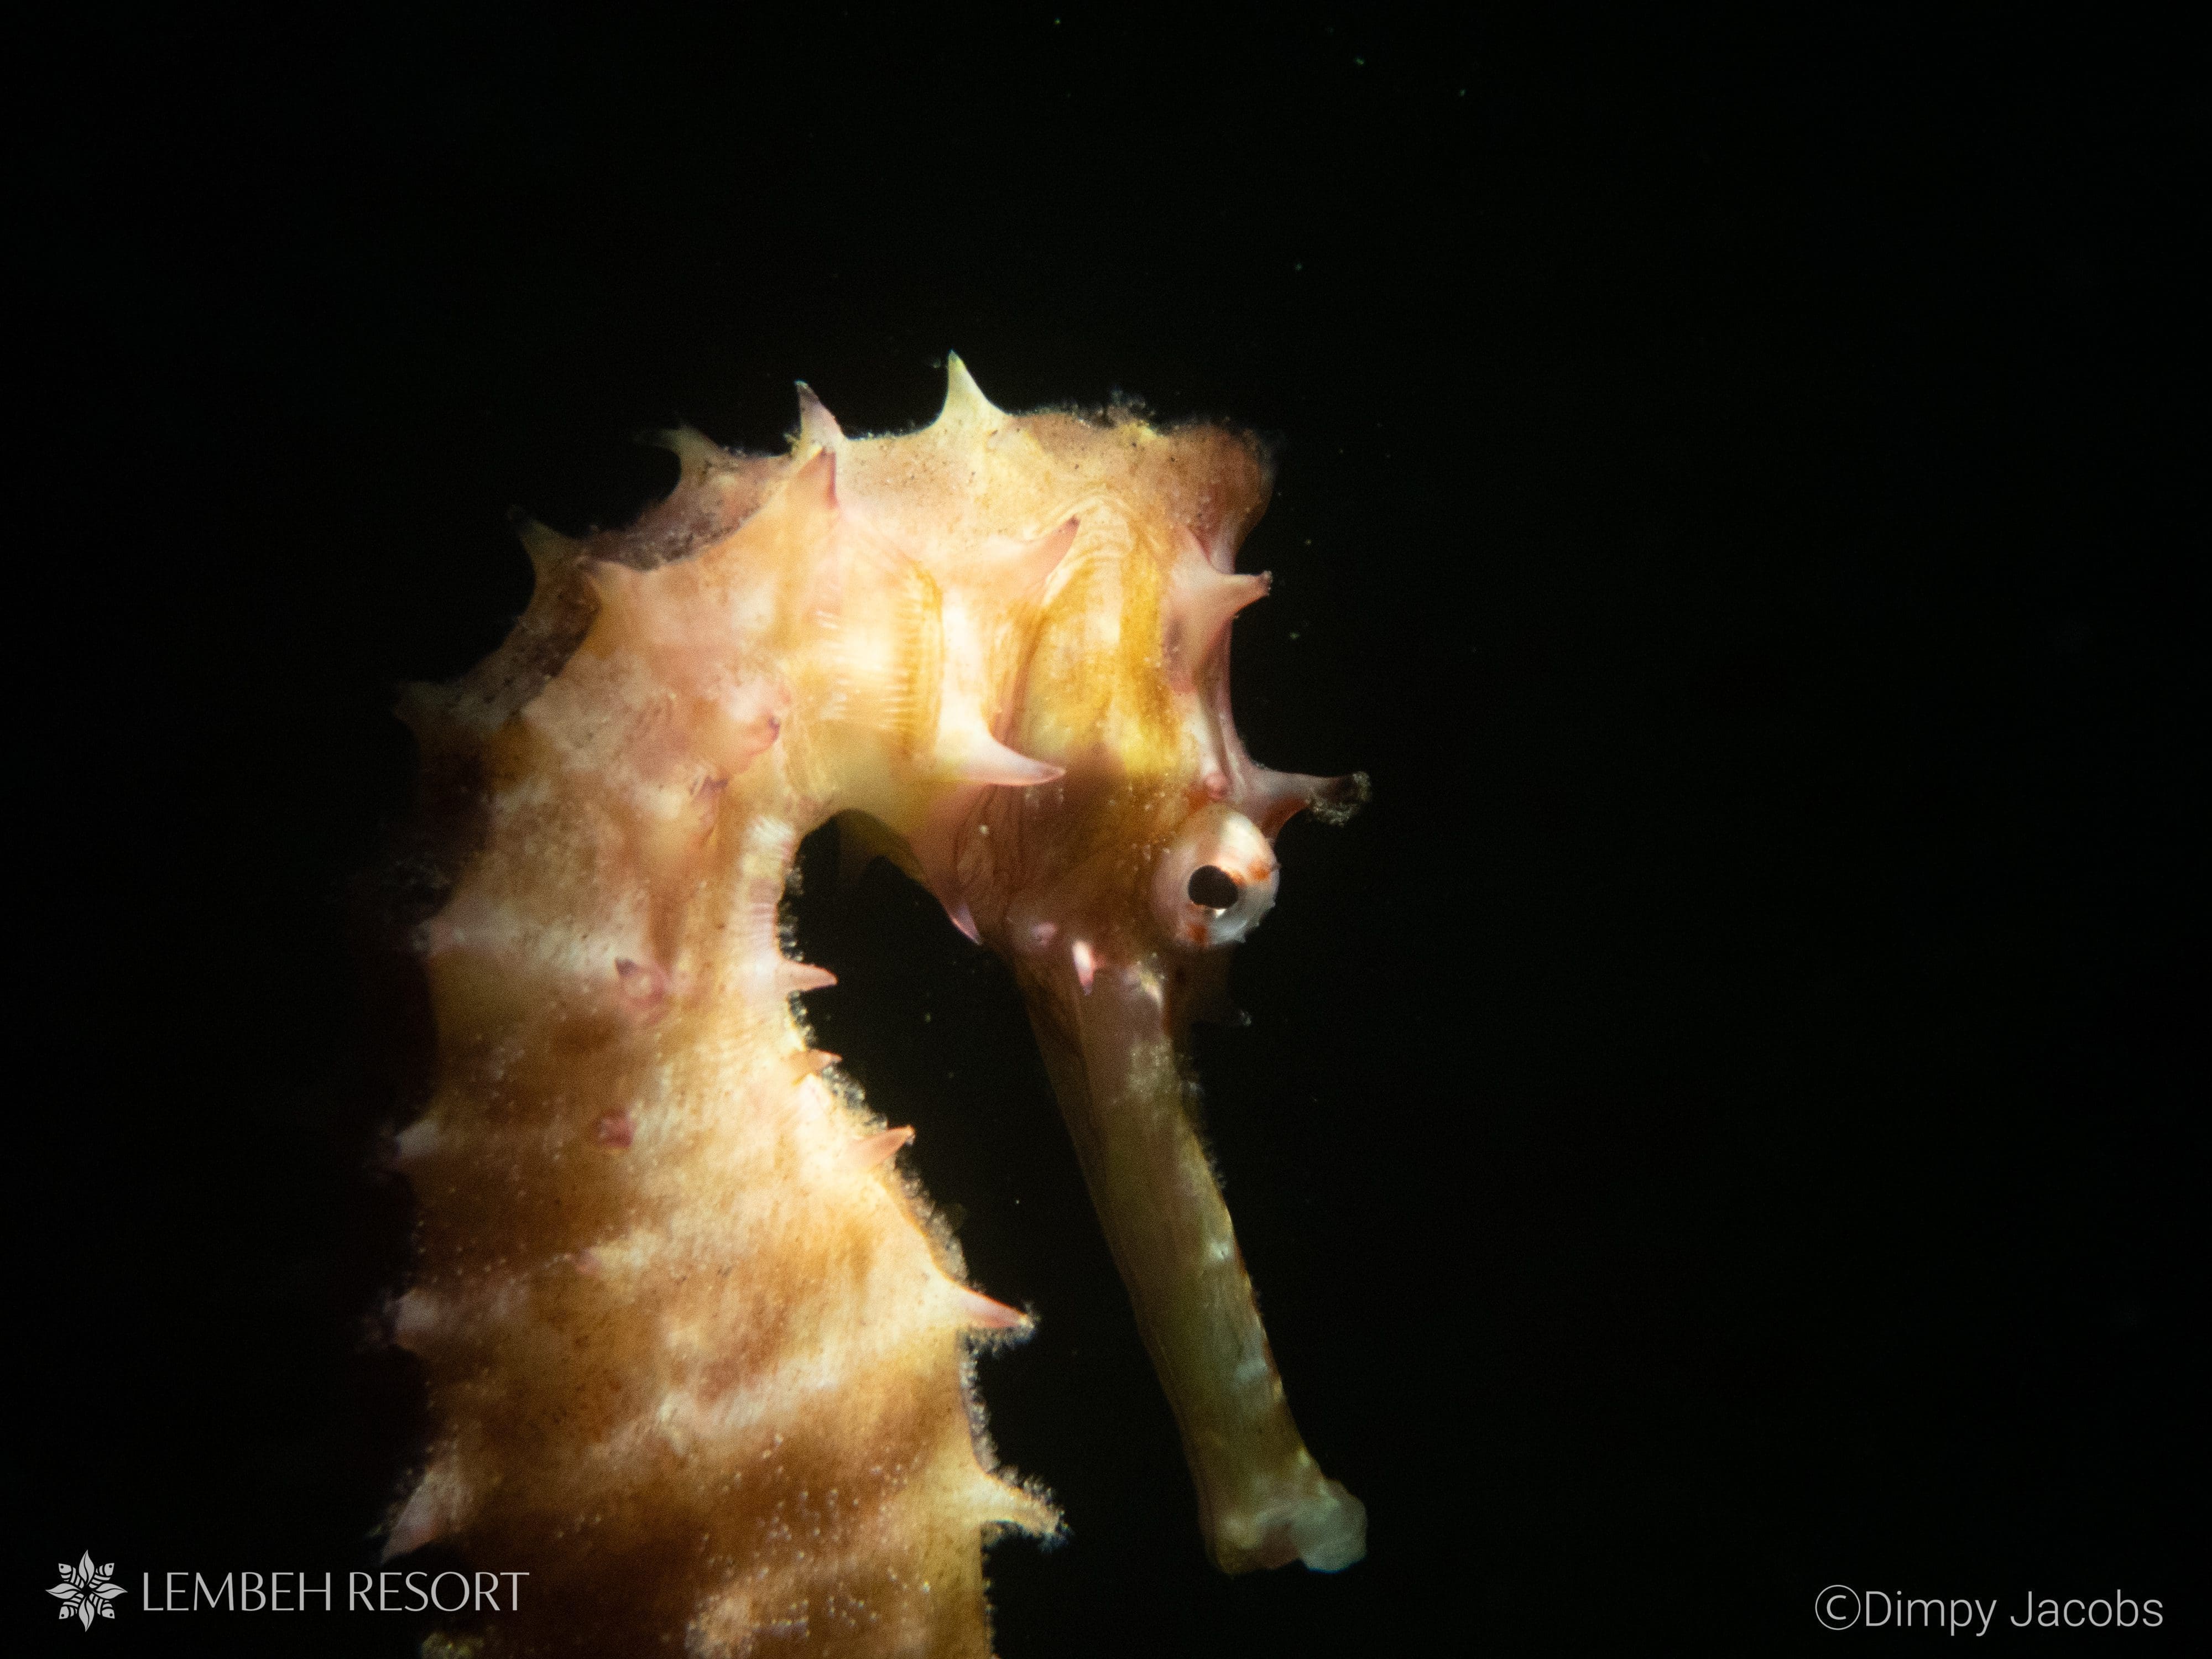 Thorny Seahorse by Dimpy Jacobs